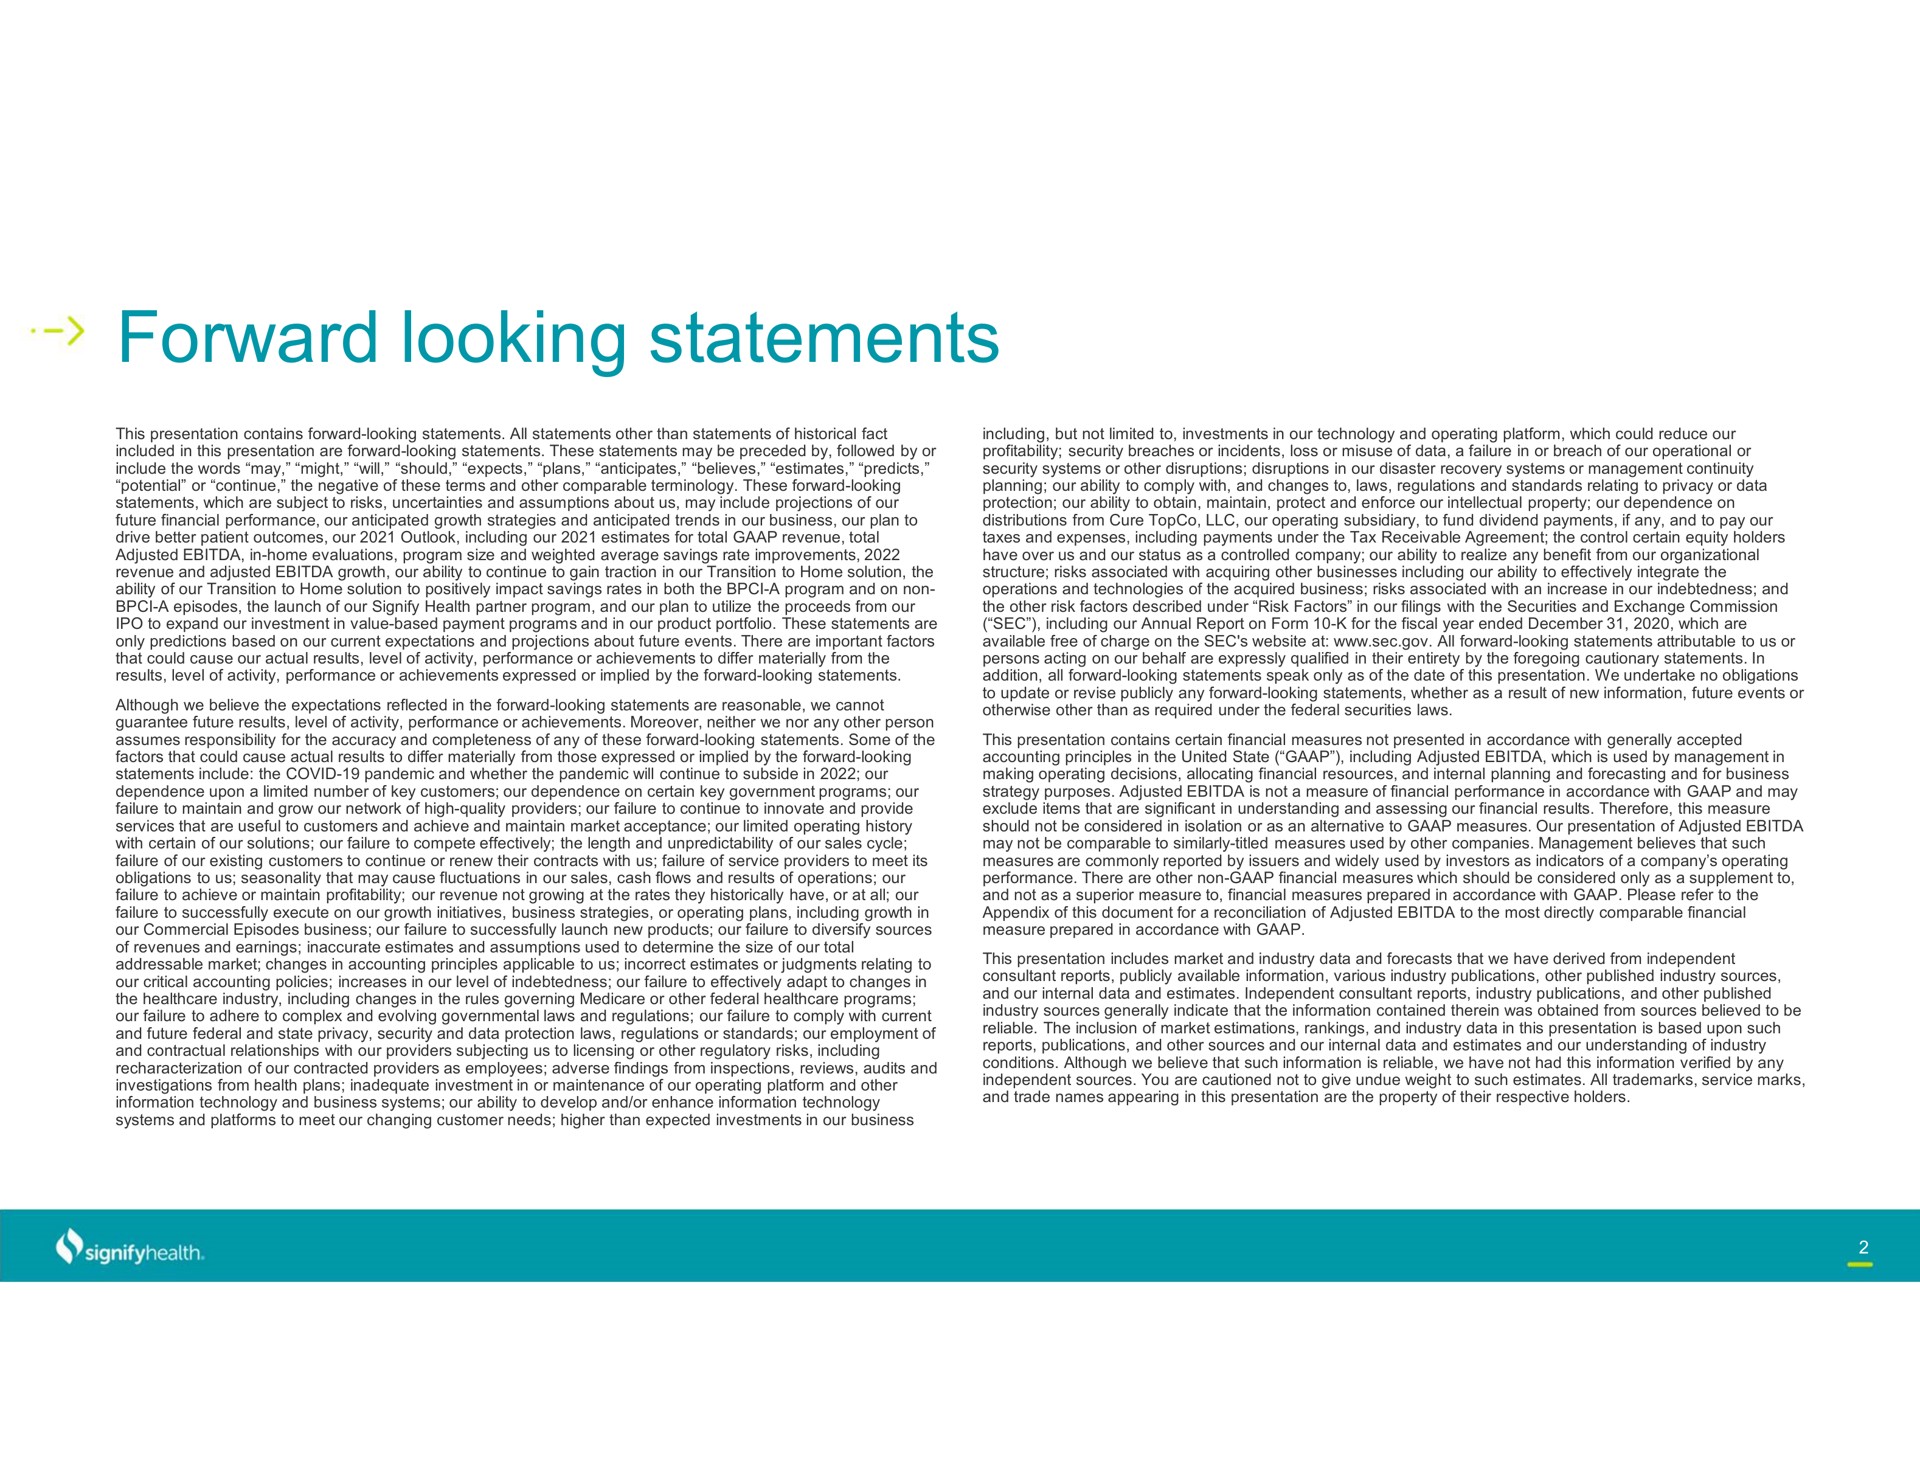 forward looking statements | Signify Health